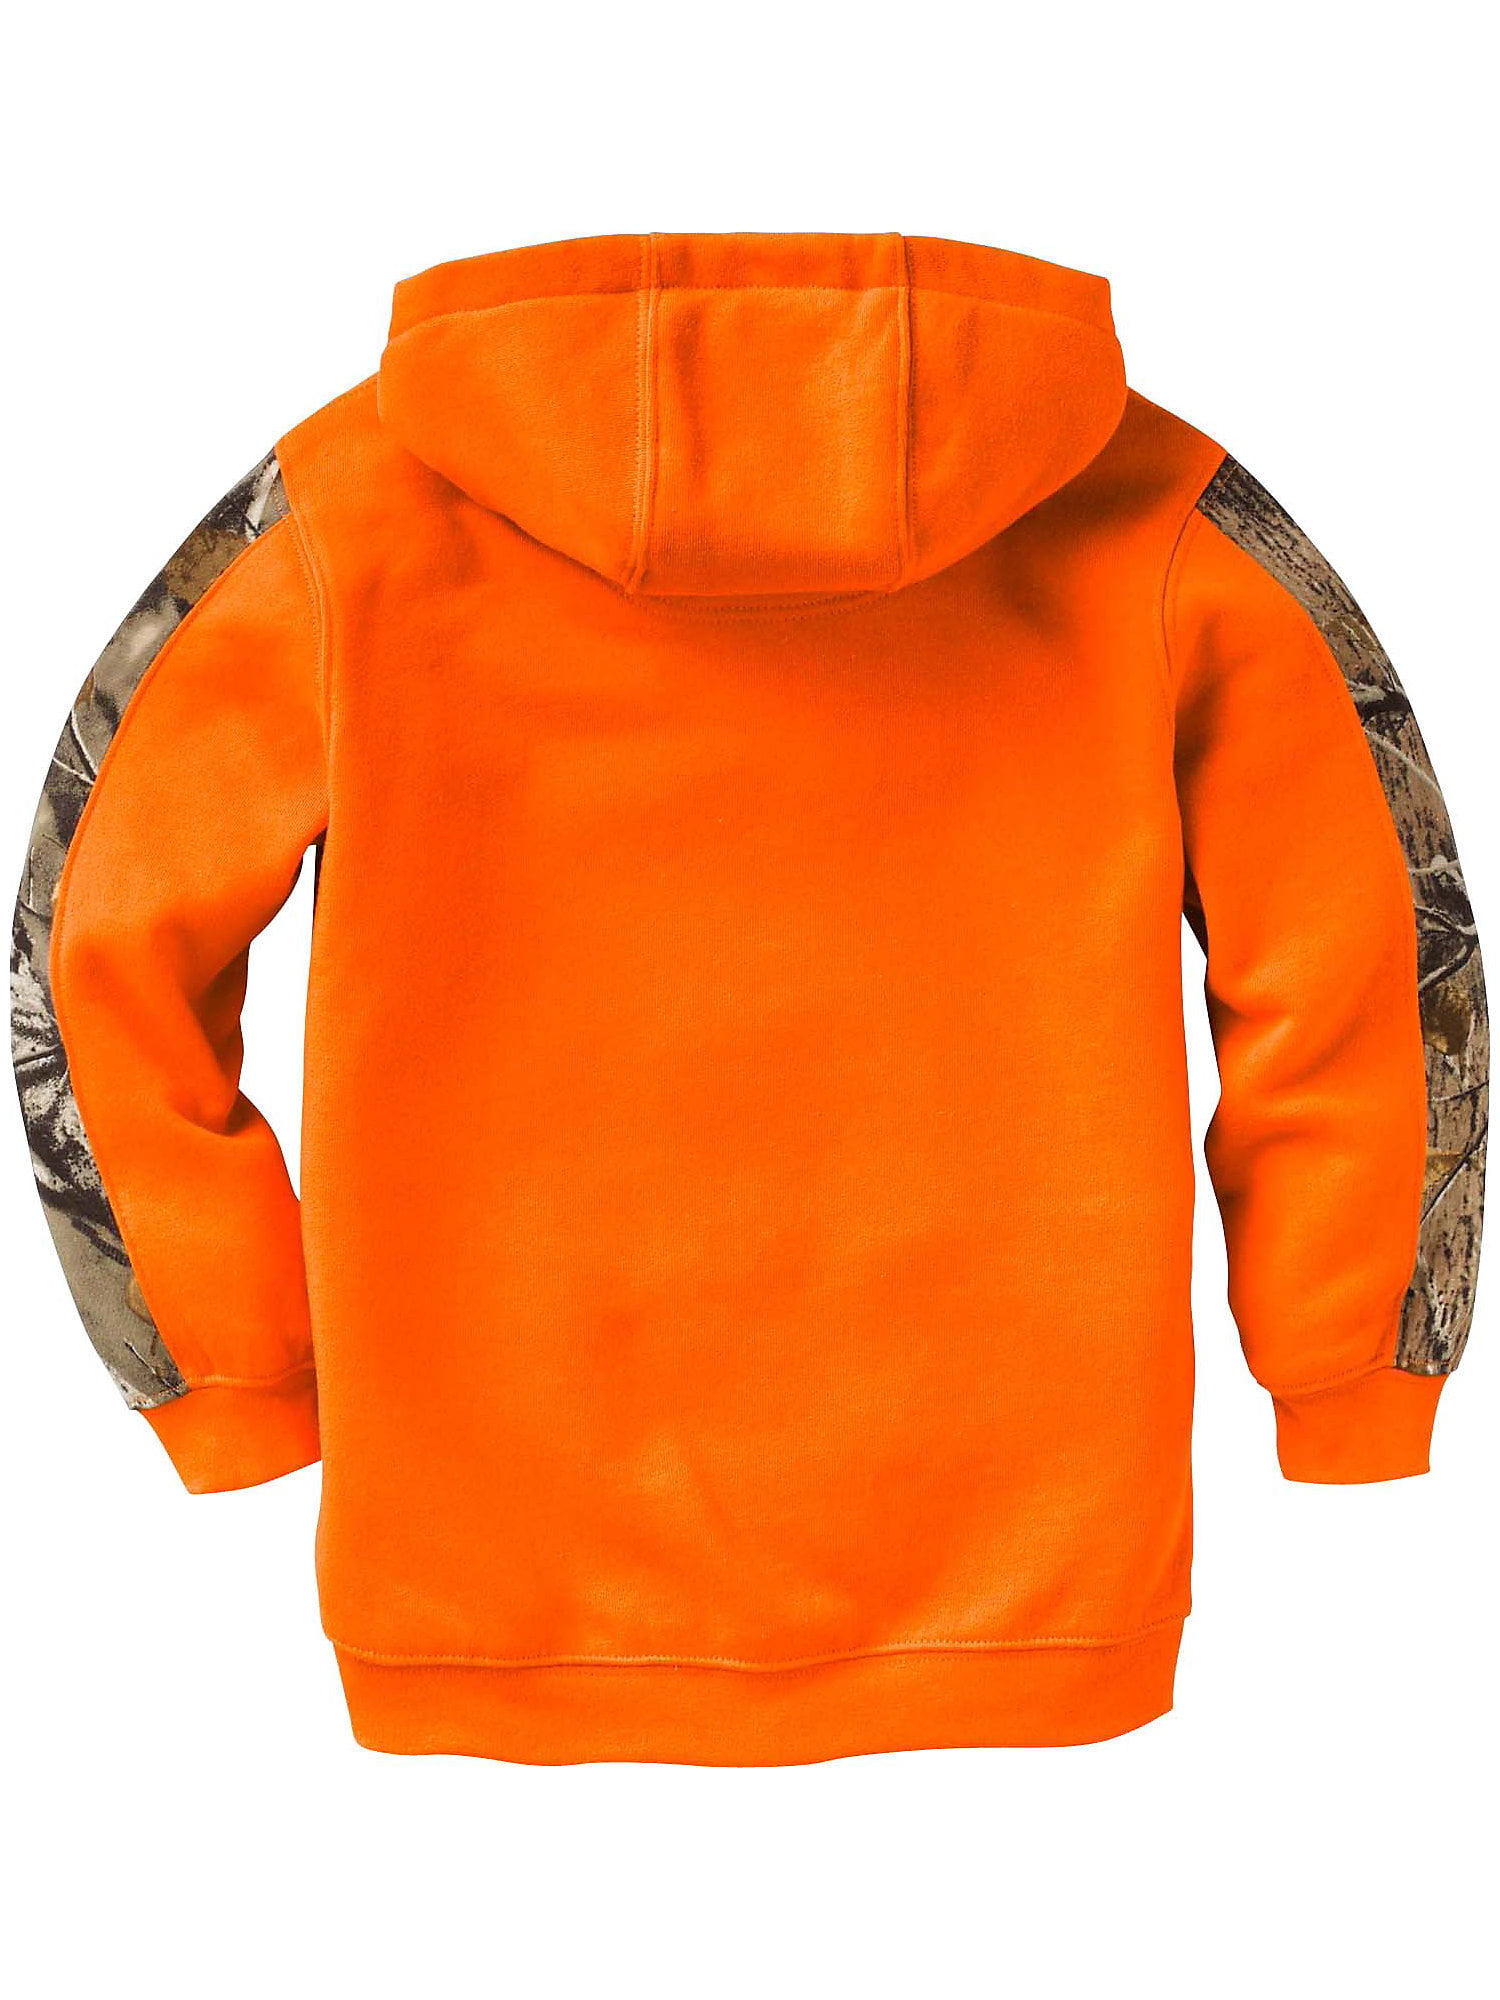 Legendary Whitetails Kids' Outfitter Hoodie